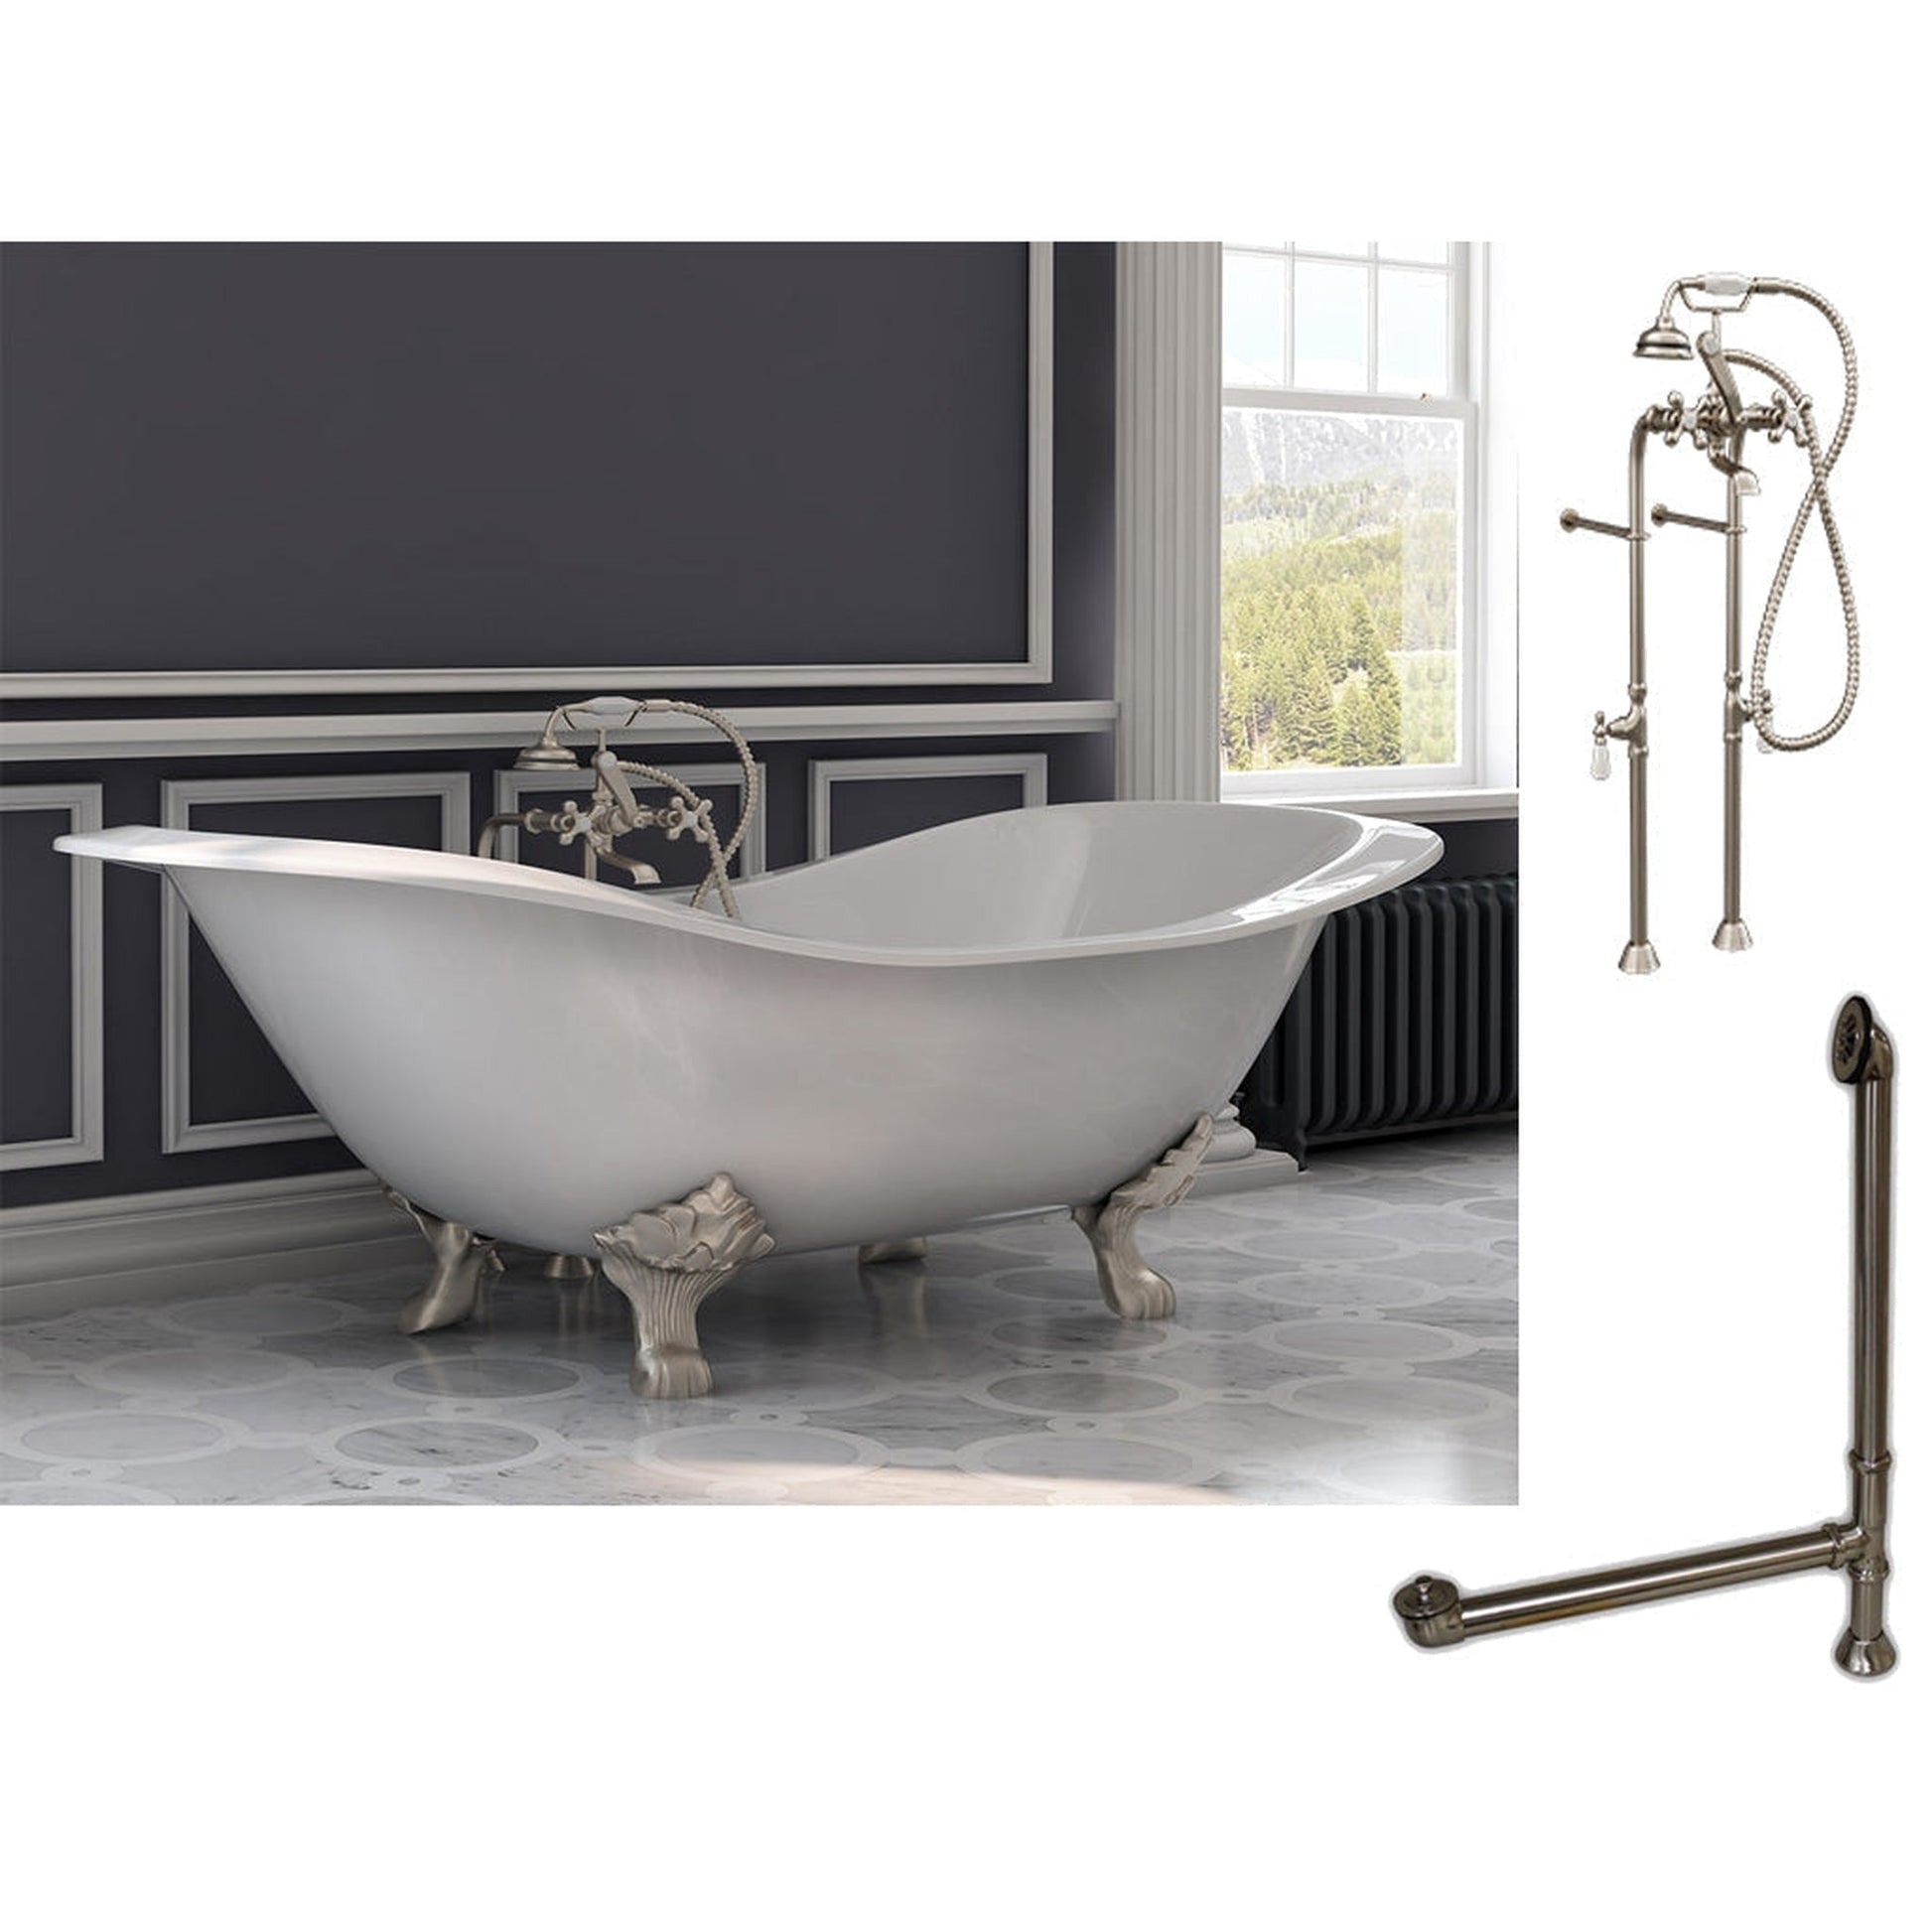 Cambridge Plumbing 72" White Cast Iron Double Slipper Clawfoot Bathtub With No Faucet Holes And Complete Plumbing Package Including Floor Mounted British Telephone Faucet, Drain And Overflow Assembly In Brushed Nickel